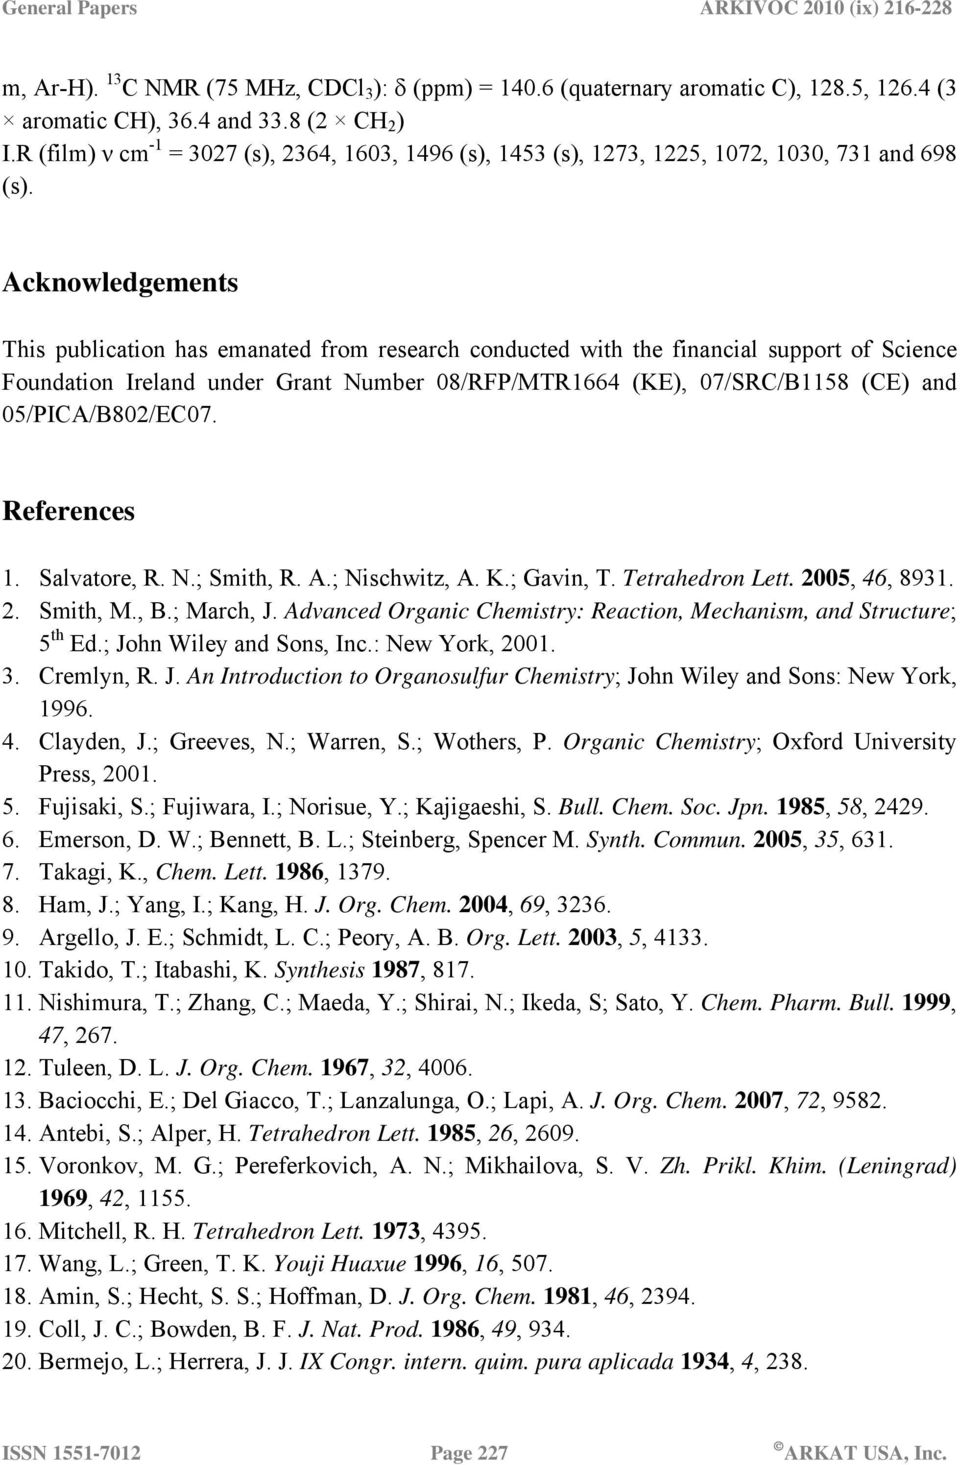 Acknowledgements This publication has emanated from research conducted with the financial support of Science Foundation Ireland under Grant Number 08/RFP/MTR1664 (KE), 07/SRC/B1158 (CE) and